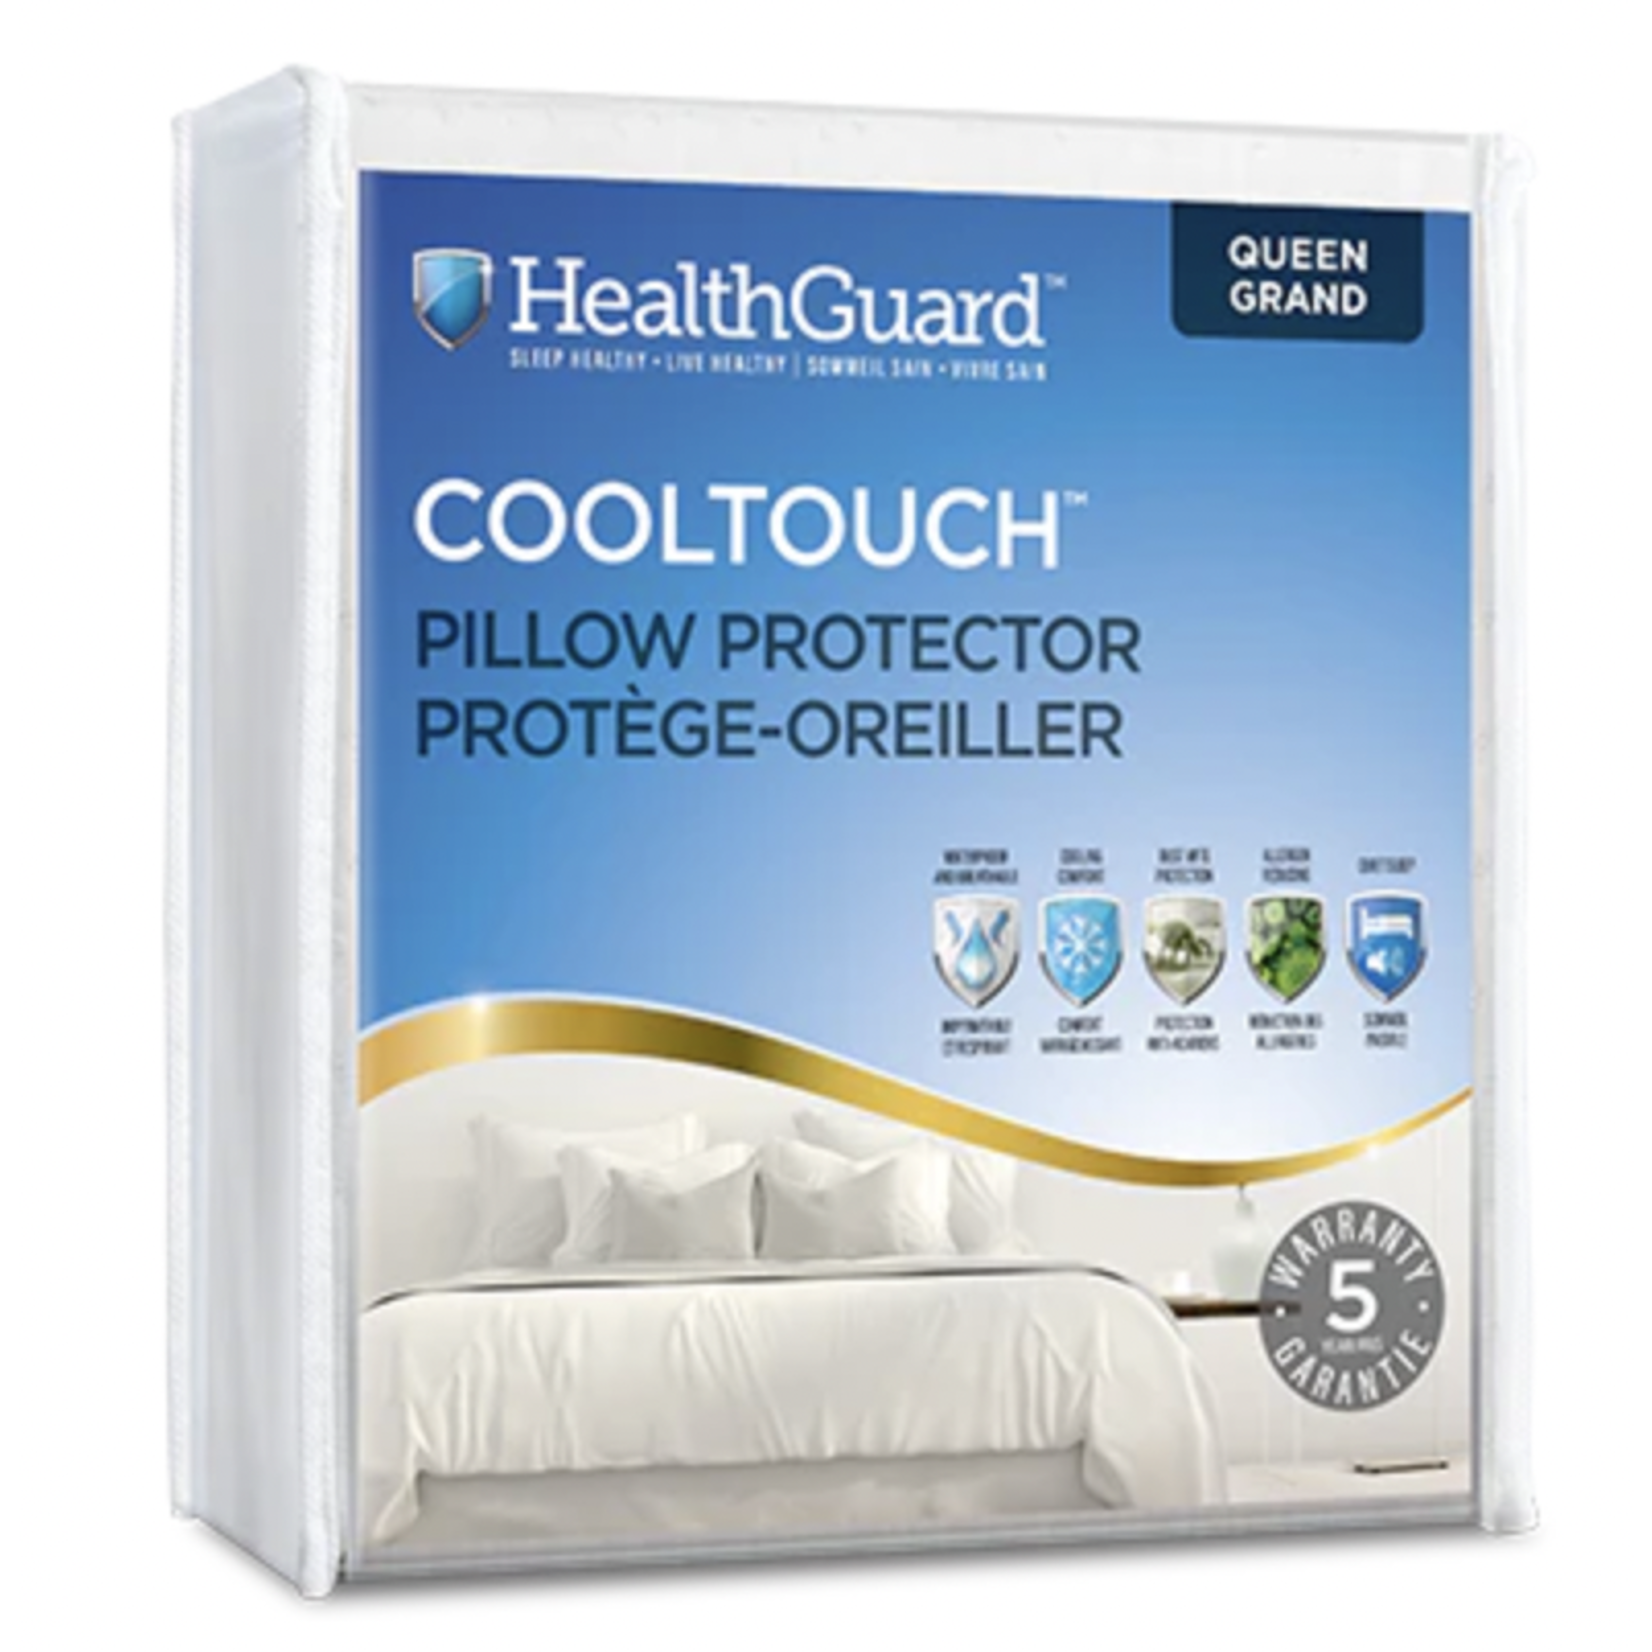 HEALTH GUARD HEALTH GUARD COOL TOUCH PILLOW PROTECTOR